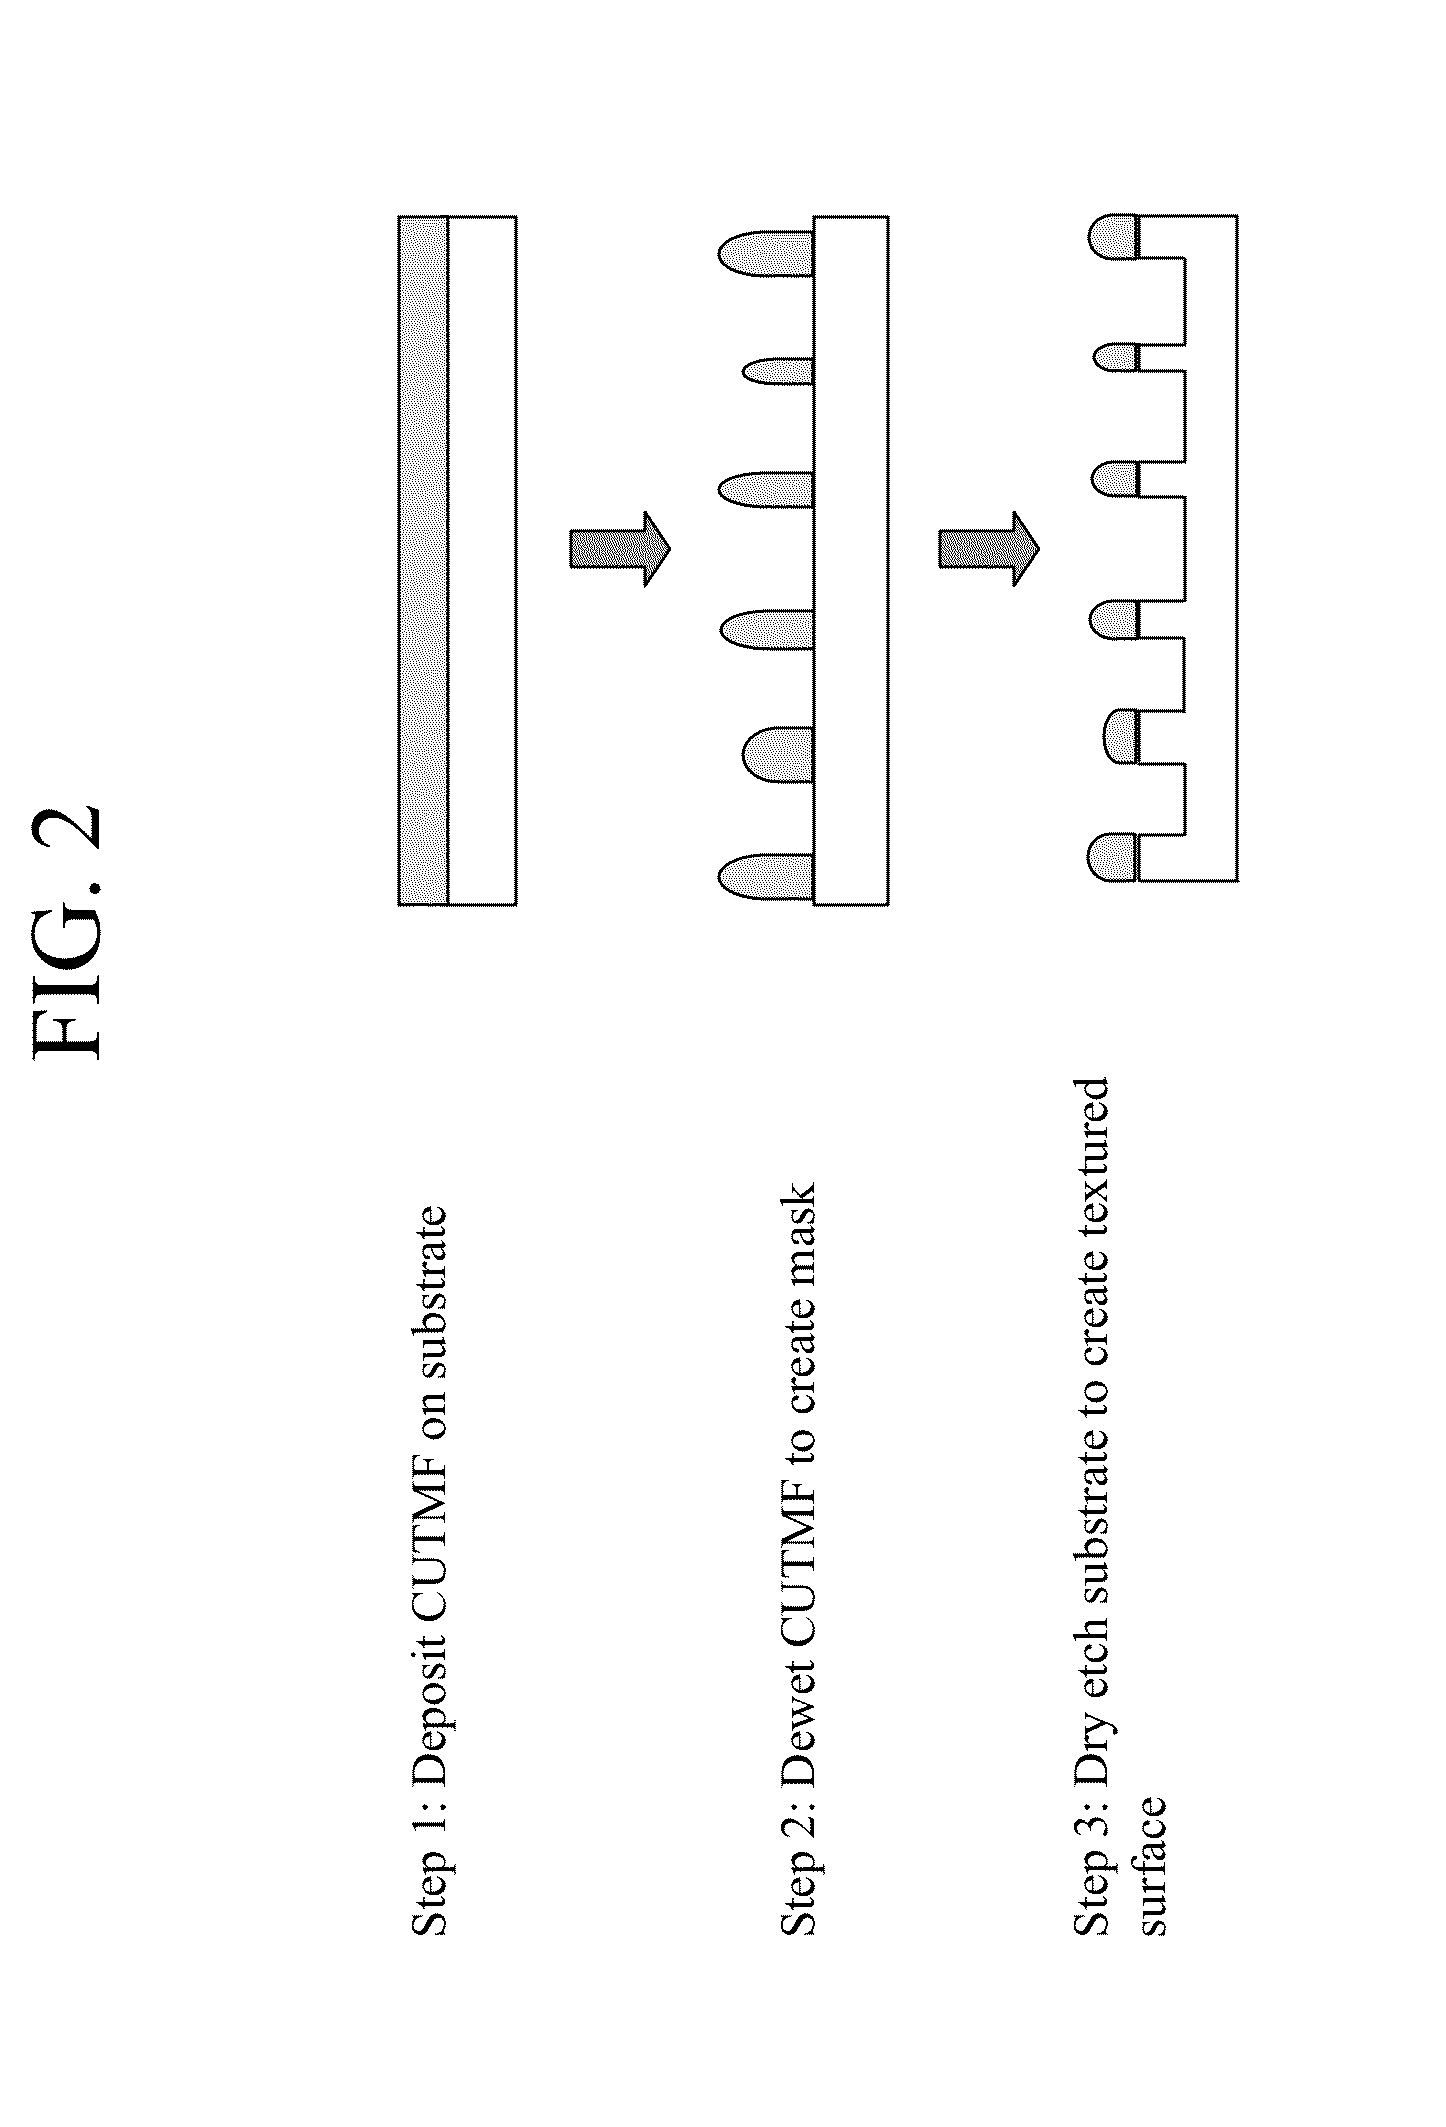 Textured surfaces and methods of making and using same